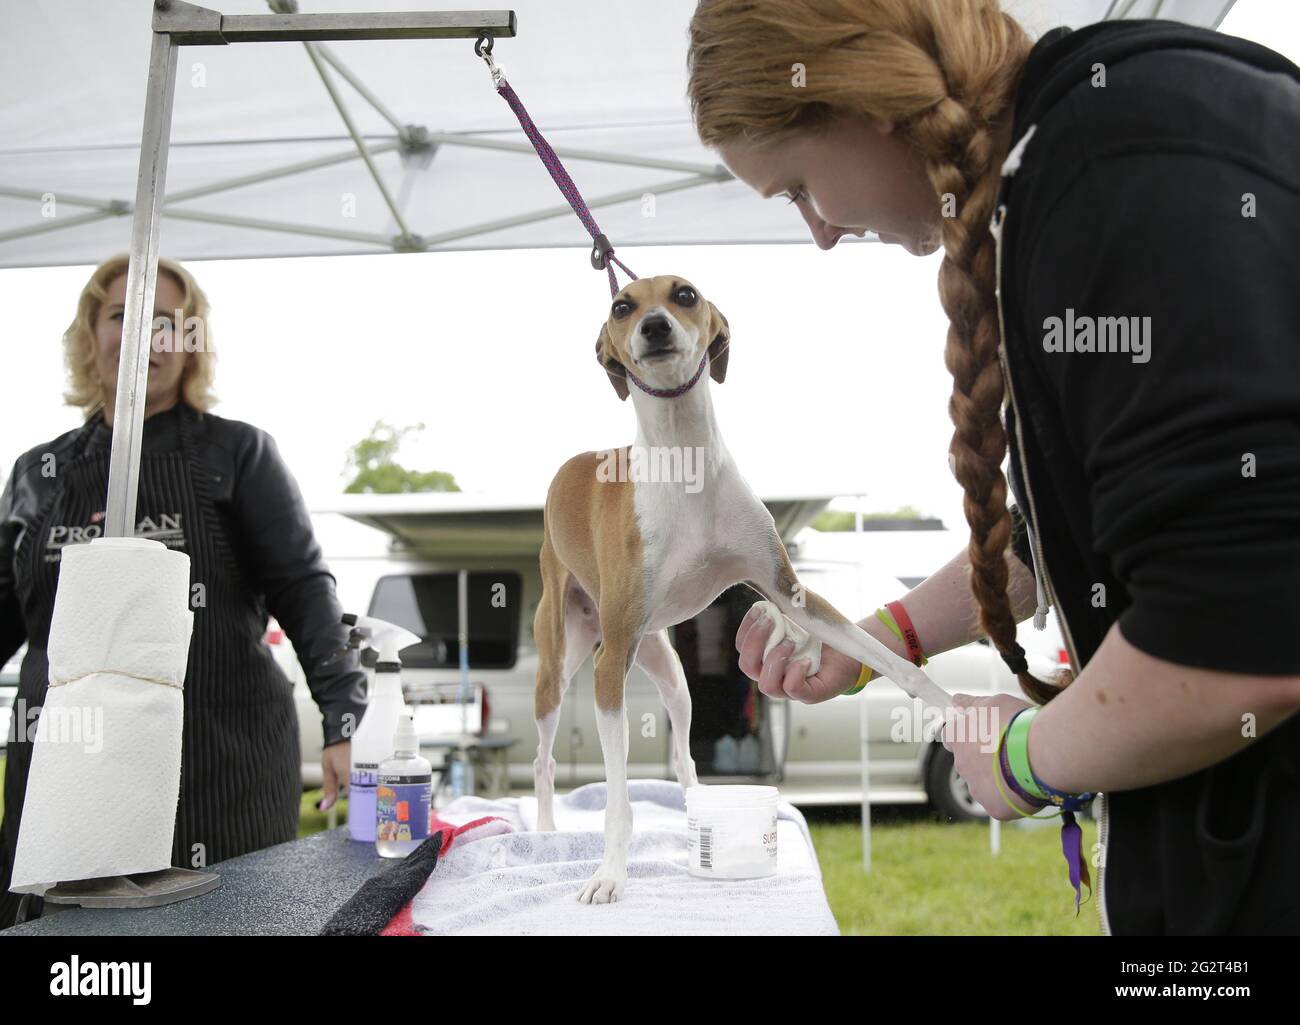 Tarrytown, United States. 12th June, 2021. An Italian Greyhound gets groomed in the benching area at the 145th annual Westminster Kennel Club Dog Show at the Lyndhurst Estate in Tarrytown, New York on Saturday, June12, 2021. This years Westminster Dog Show was delayed due to COVID-19 and next years competition will return again to Madison Square Garden. Photo by John Angelillo/UPI Credit: UPI/Alamy Live News Stock Photo